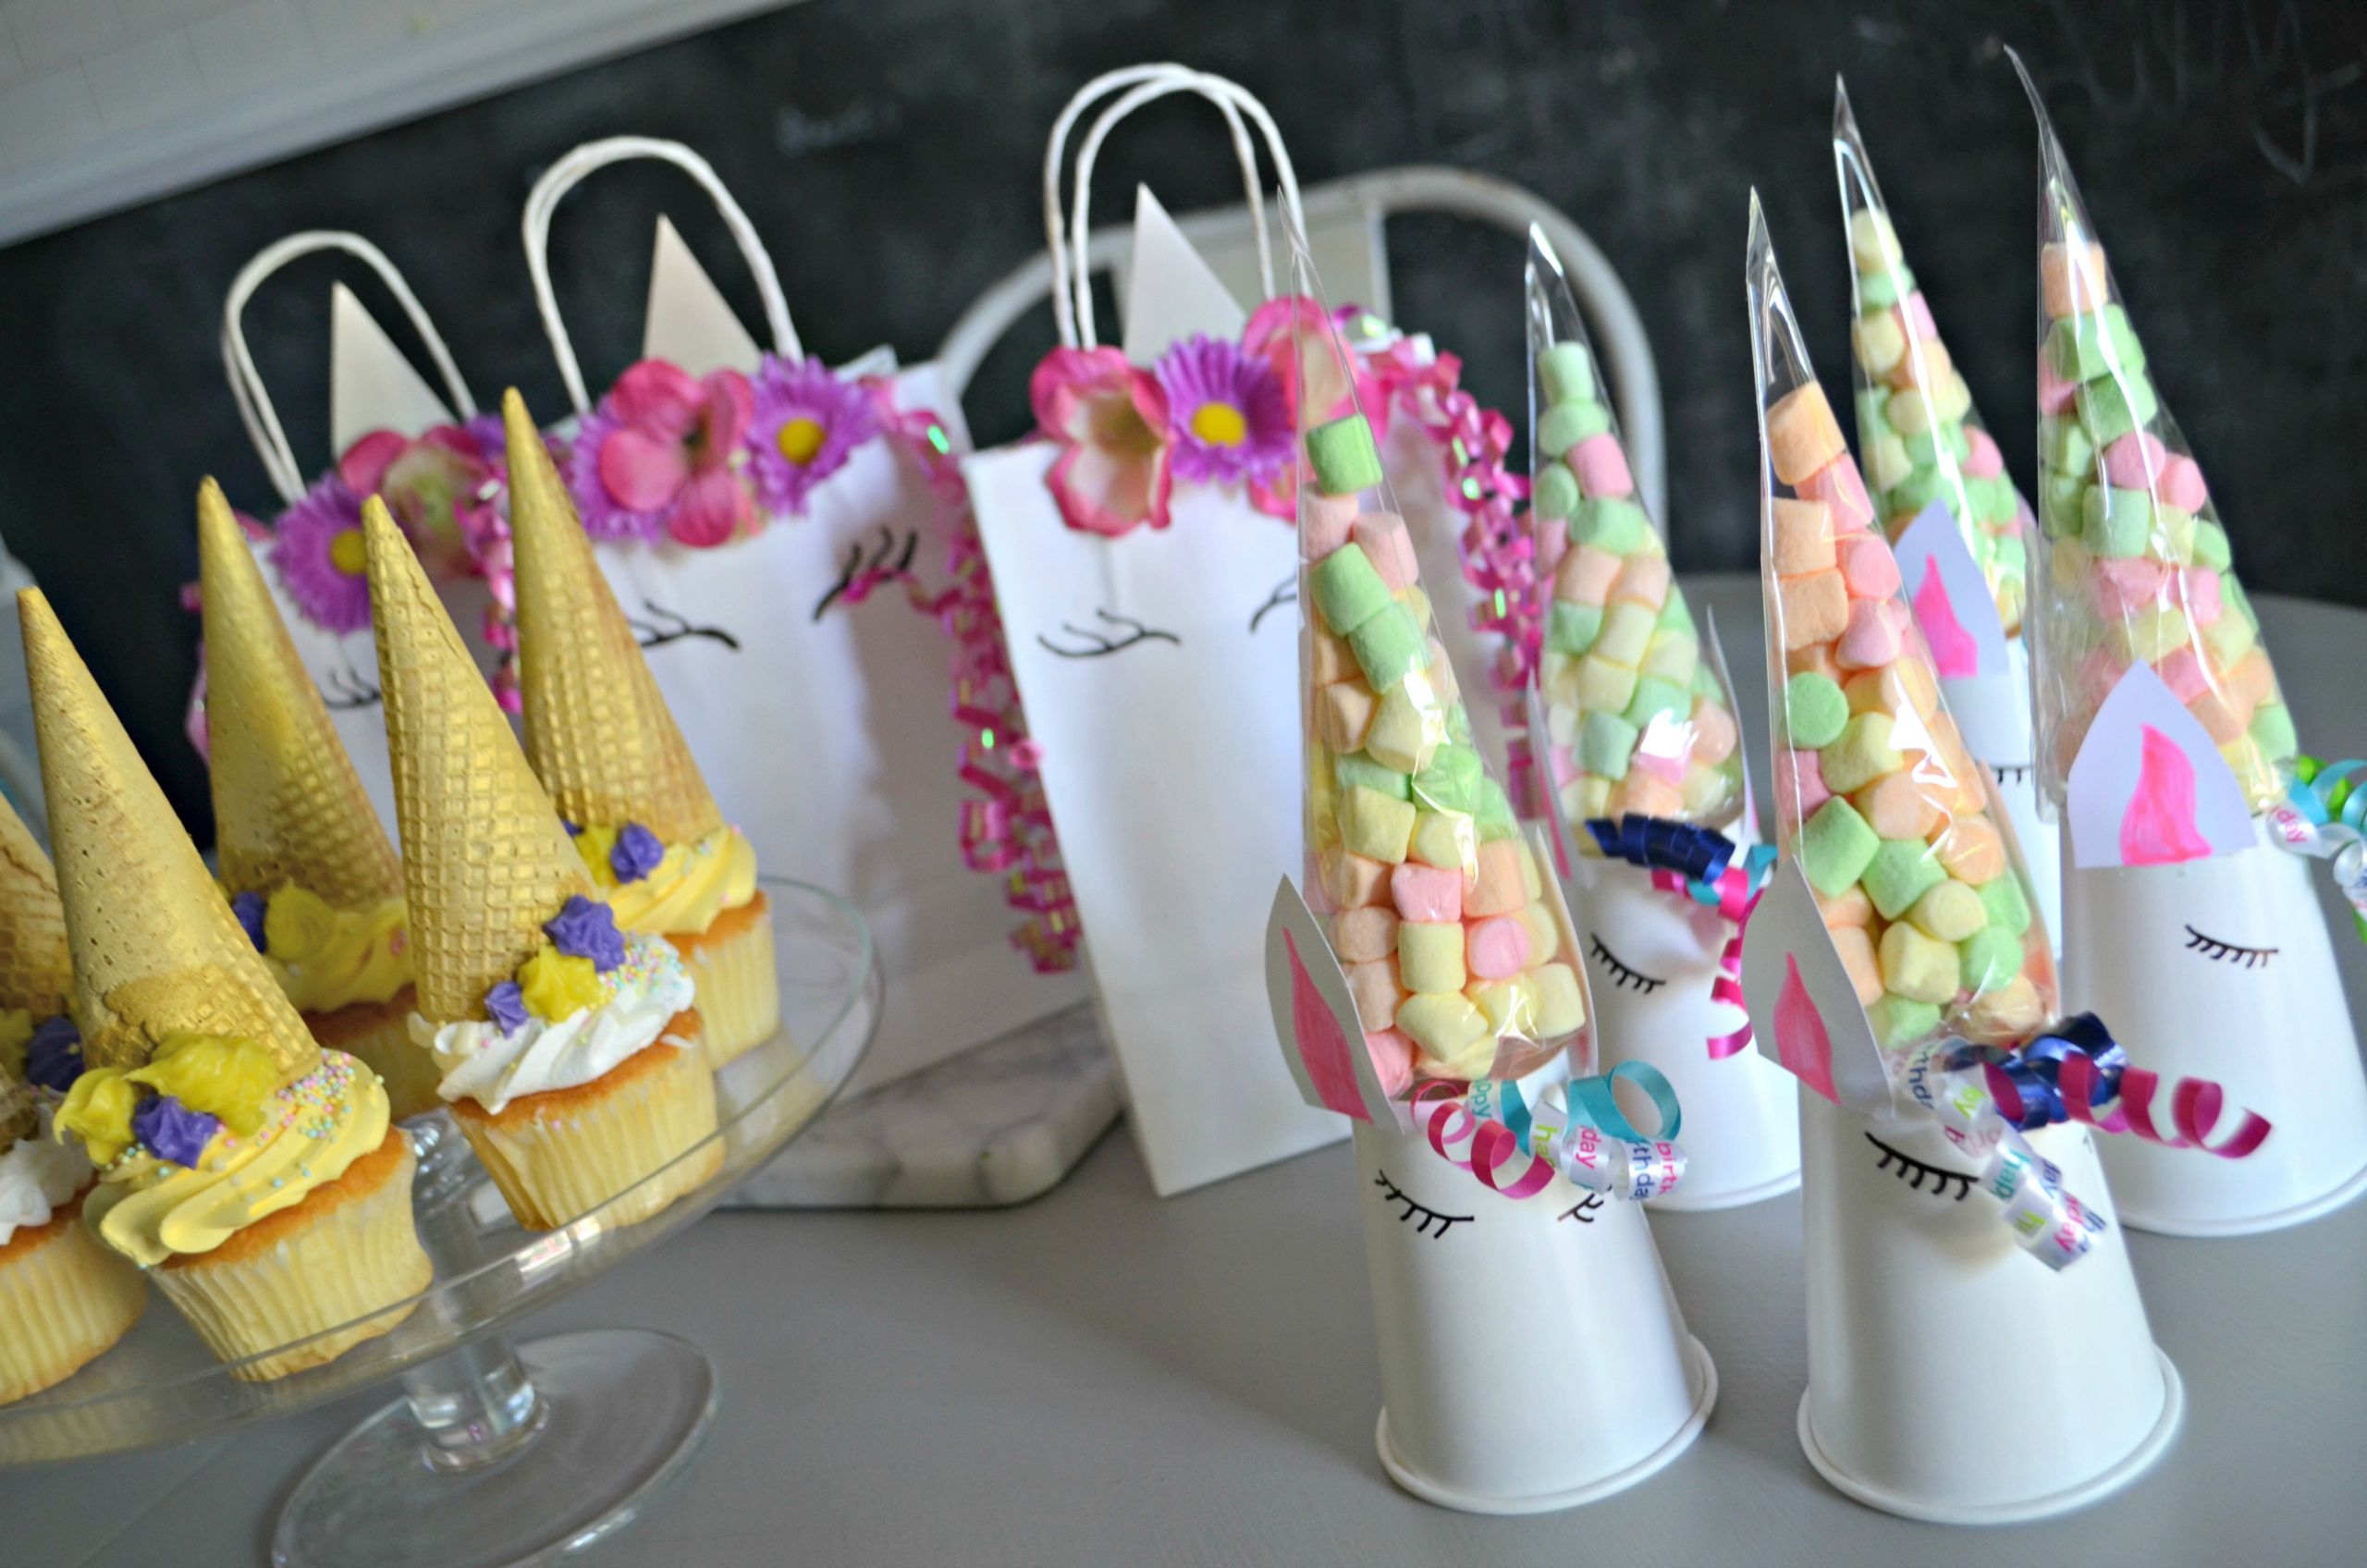 Coolest Unicorn Party Ideas
 Make These 3 Frugal Cute and Easy DIY Unicorn Birthday